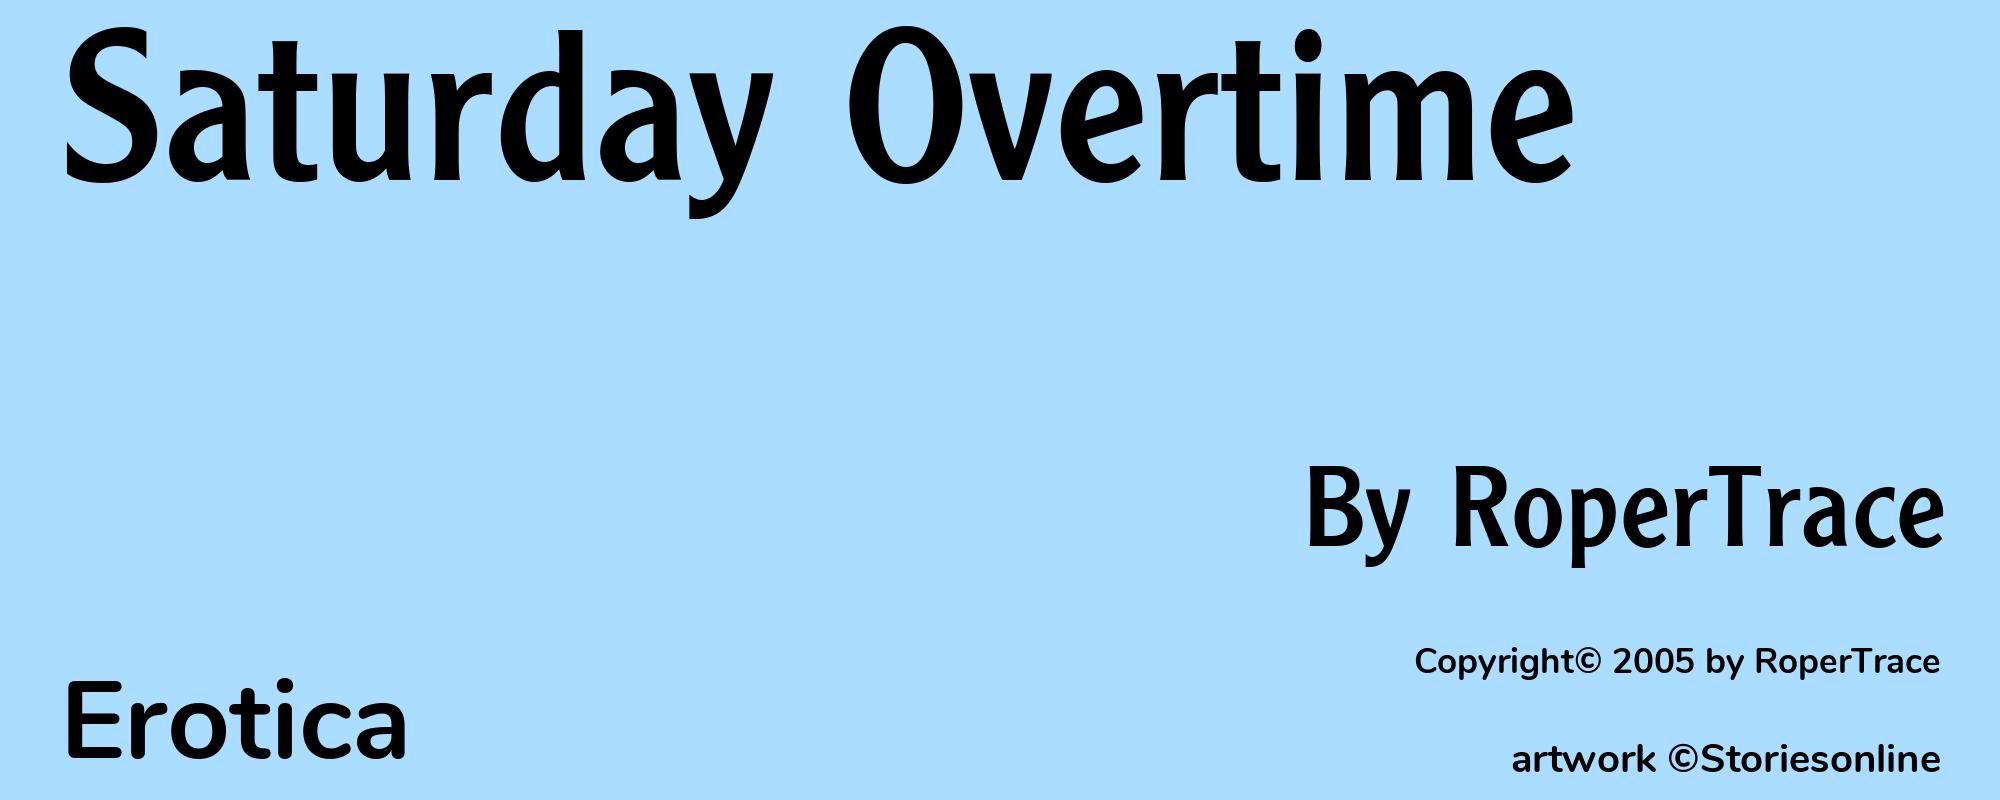 Saturday Overtime - Cover